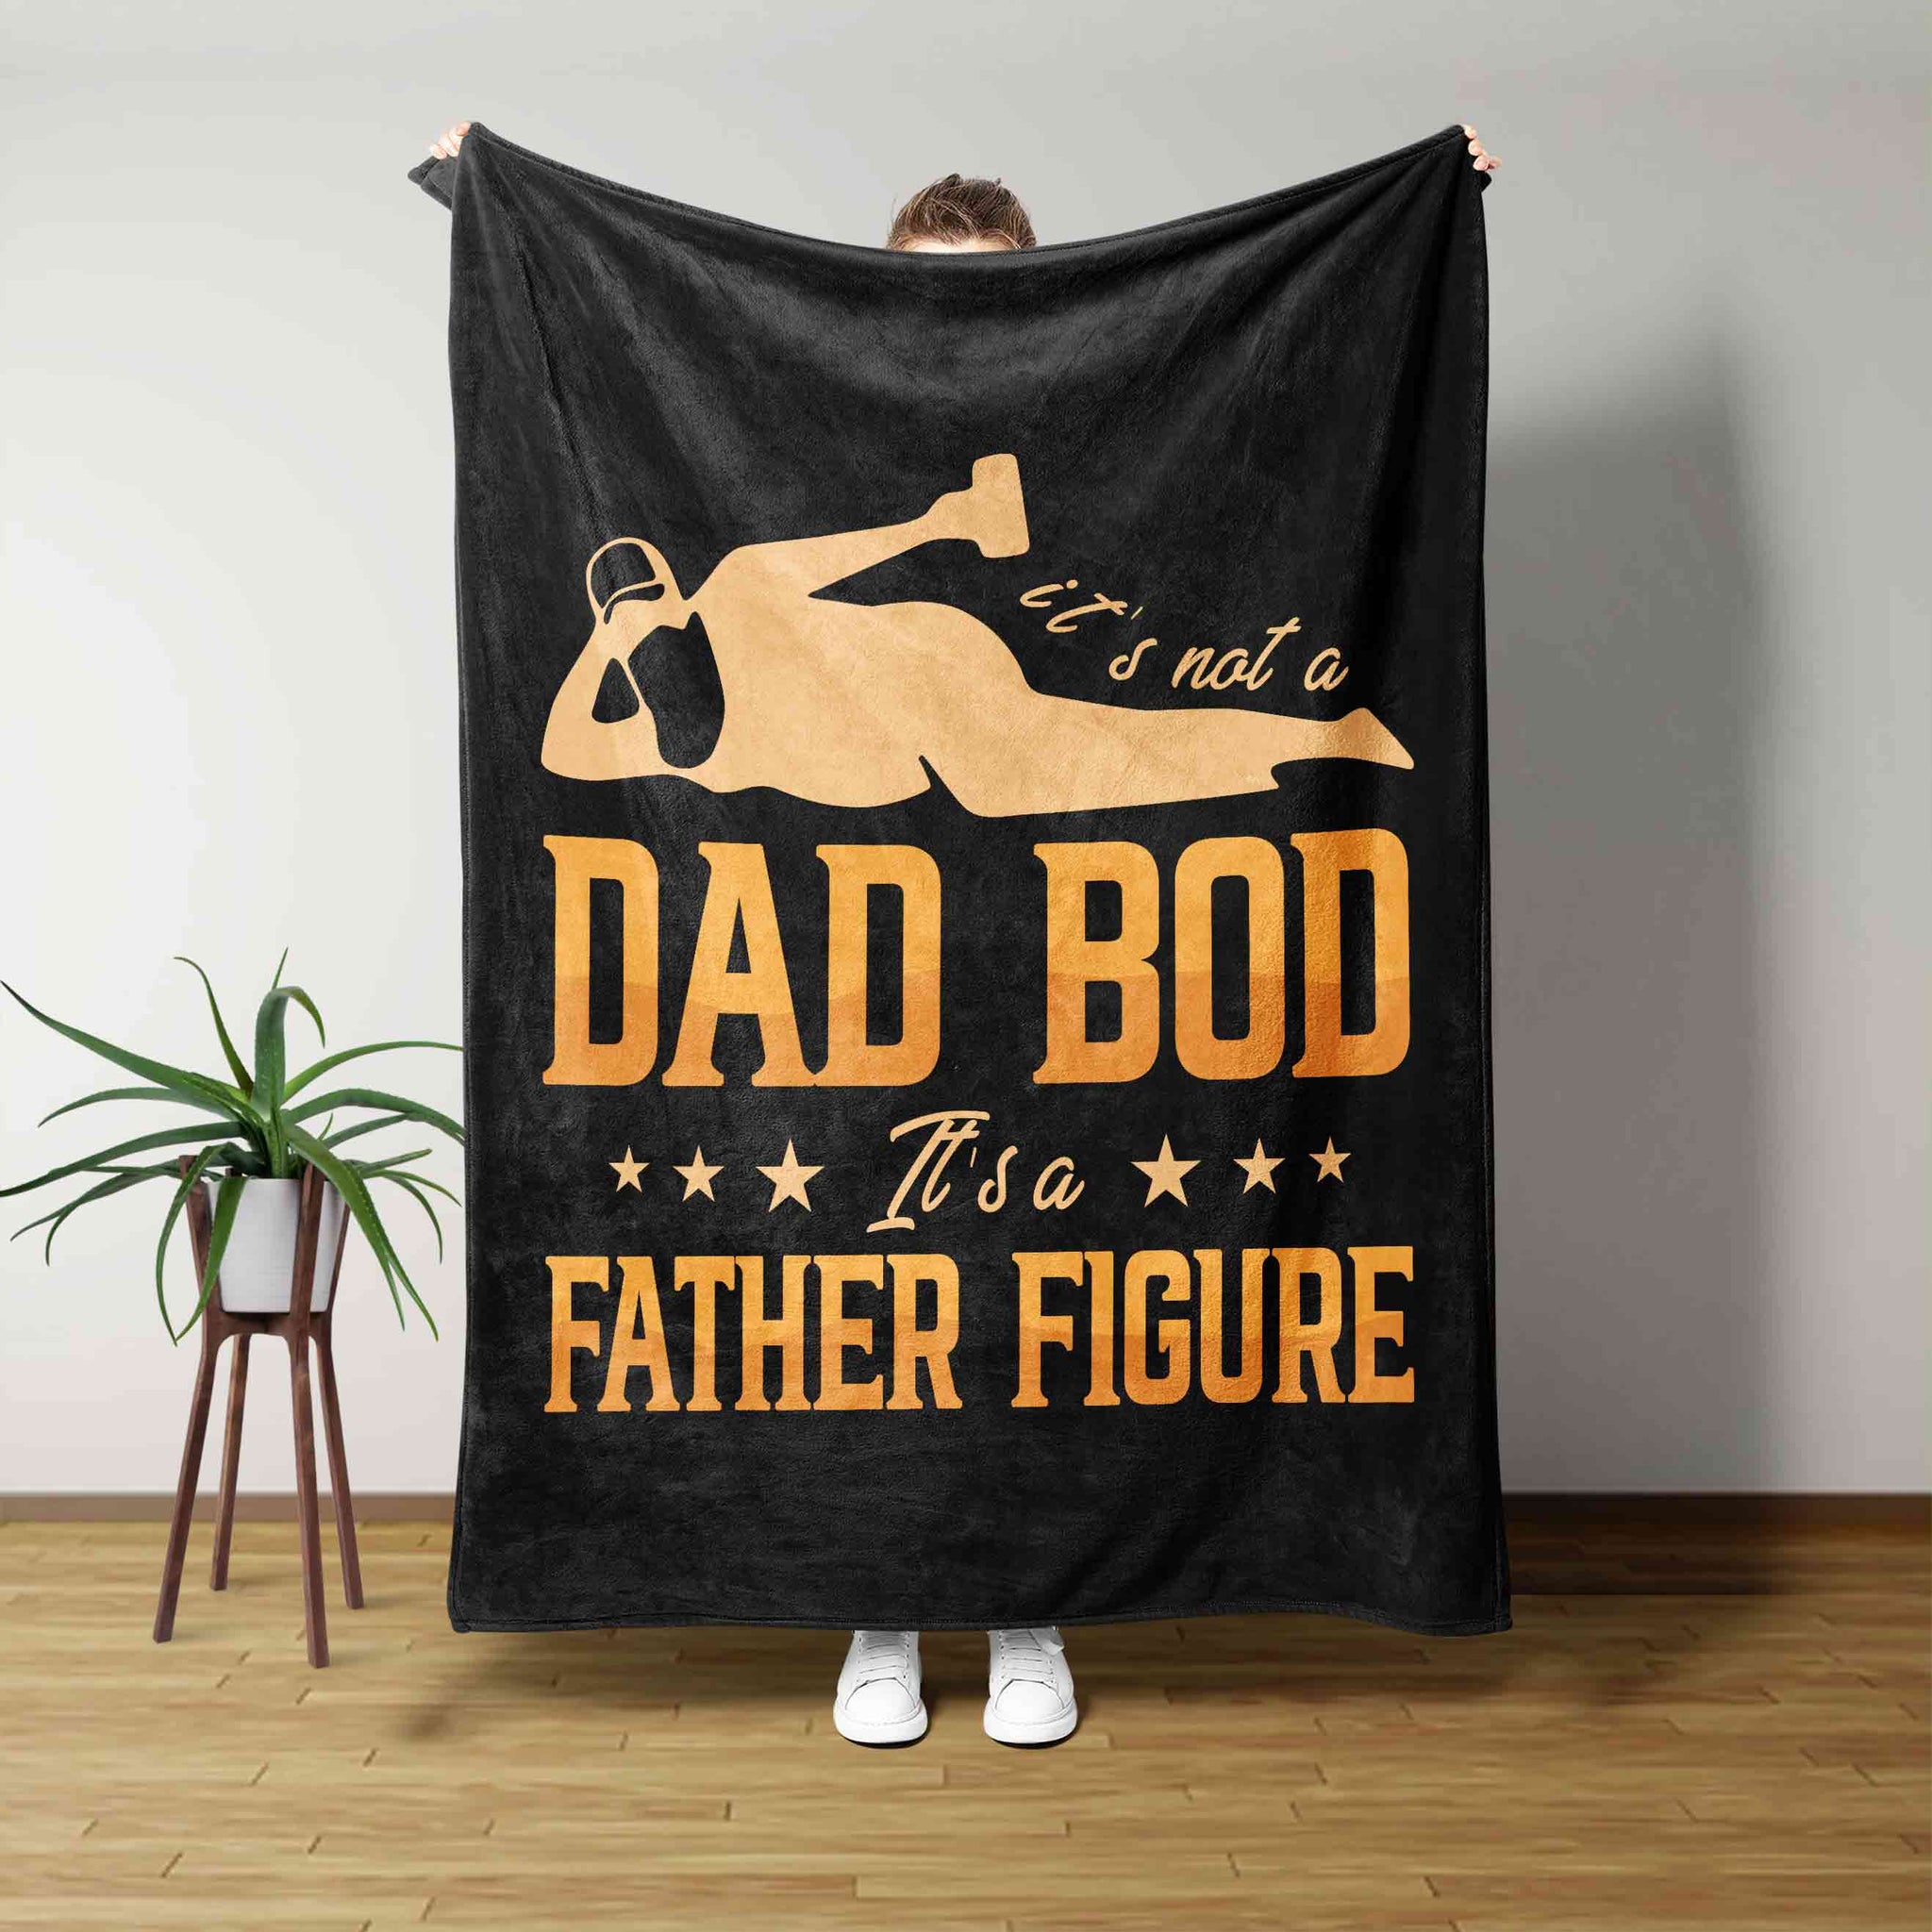 It's Not A Dad Bod Blanket, It's A Father Figure Blanket, Dad Blanket, Star Blanket, Family Blanket